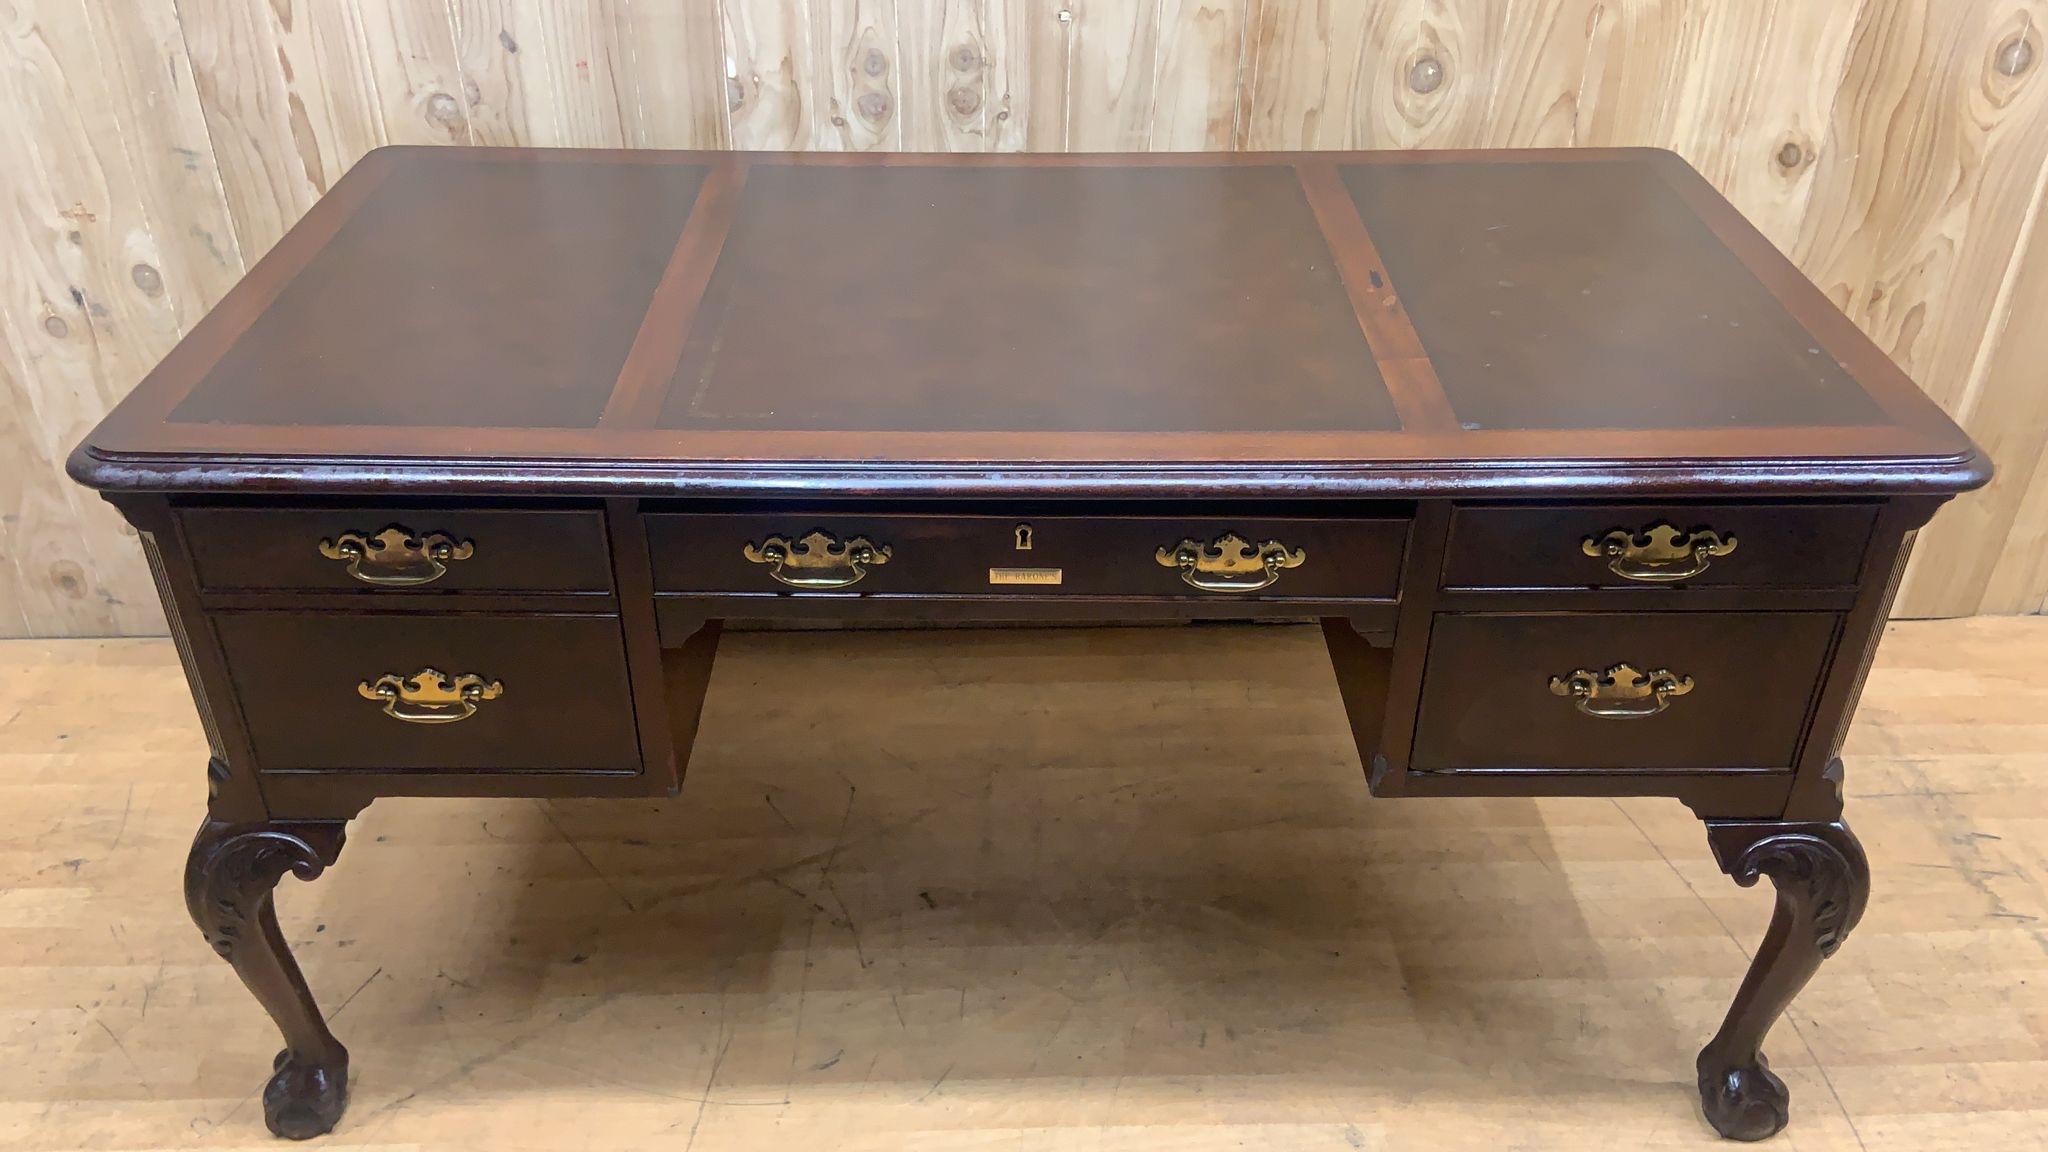 Vintage Heckman English Chippendale Tooled Leather Top Cabriole Leg Writing Desk In Good Condition For Sale In Chicago, IL